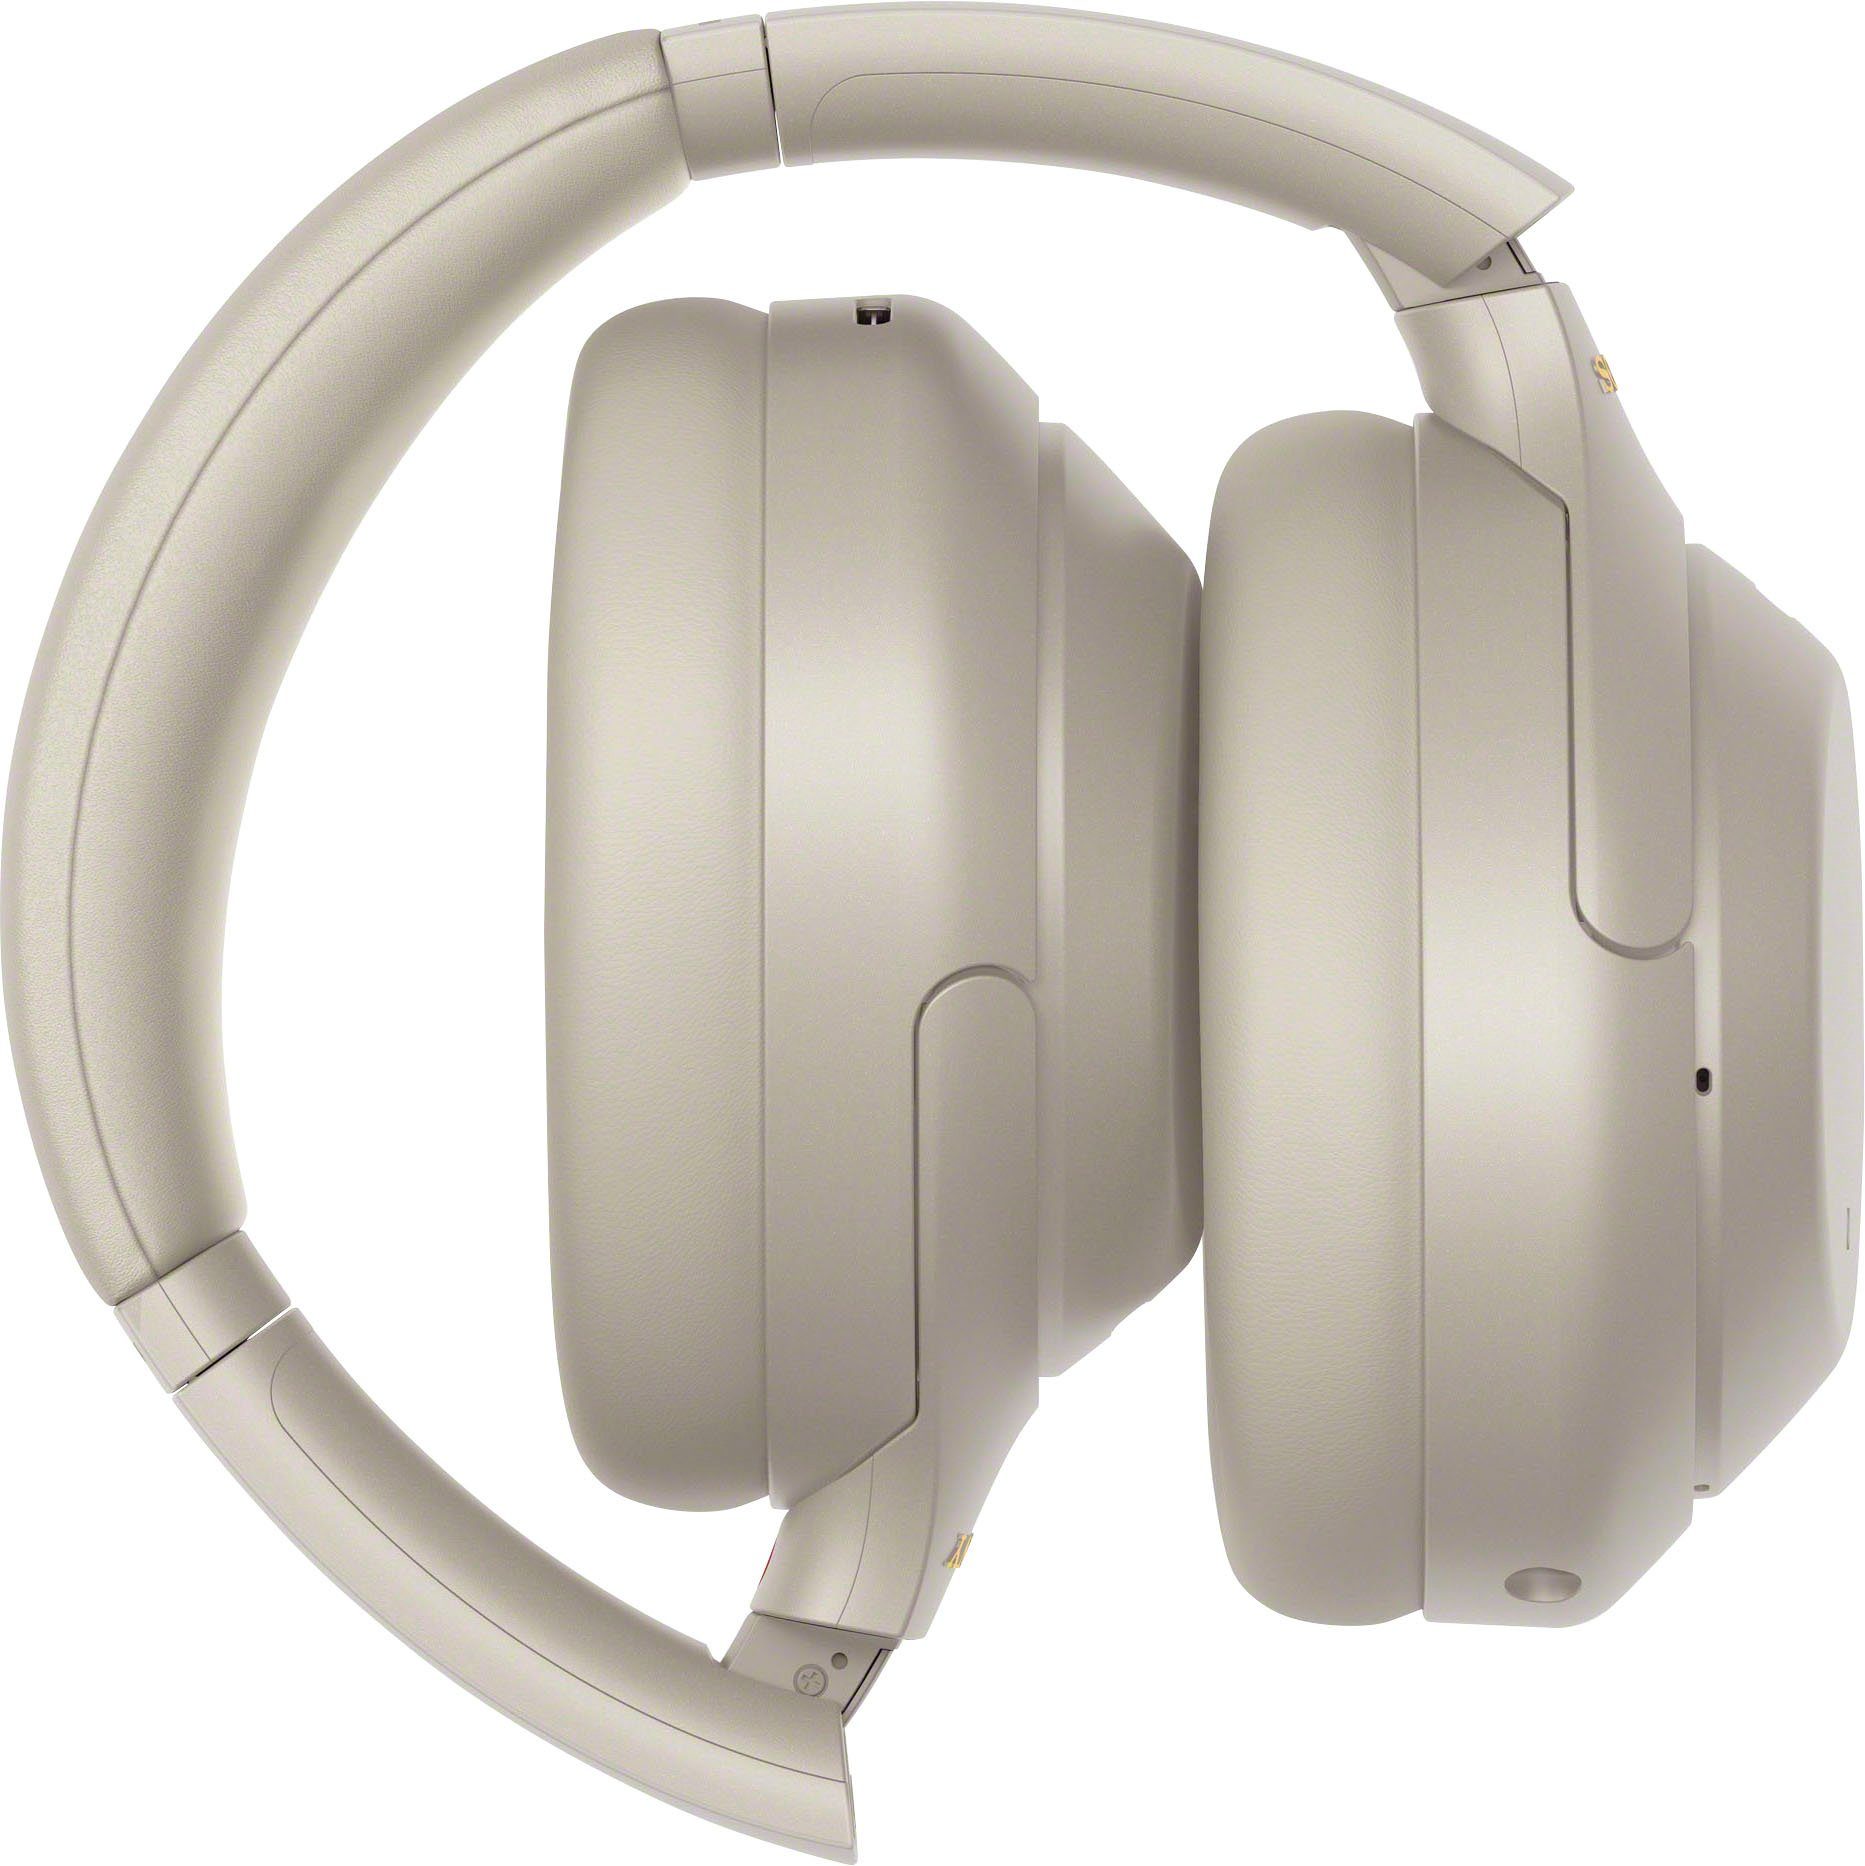 Sensor, Bluetooth, WH-1000XM4 Sony One-Touch Touch Schnellladefunktion) NFC, kabelloser Silber via Verbindung (Noise-Cancelling, NFC, Over-Ear-Kopfhörer